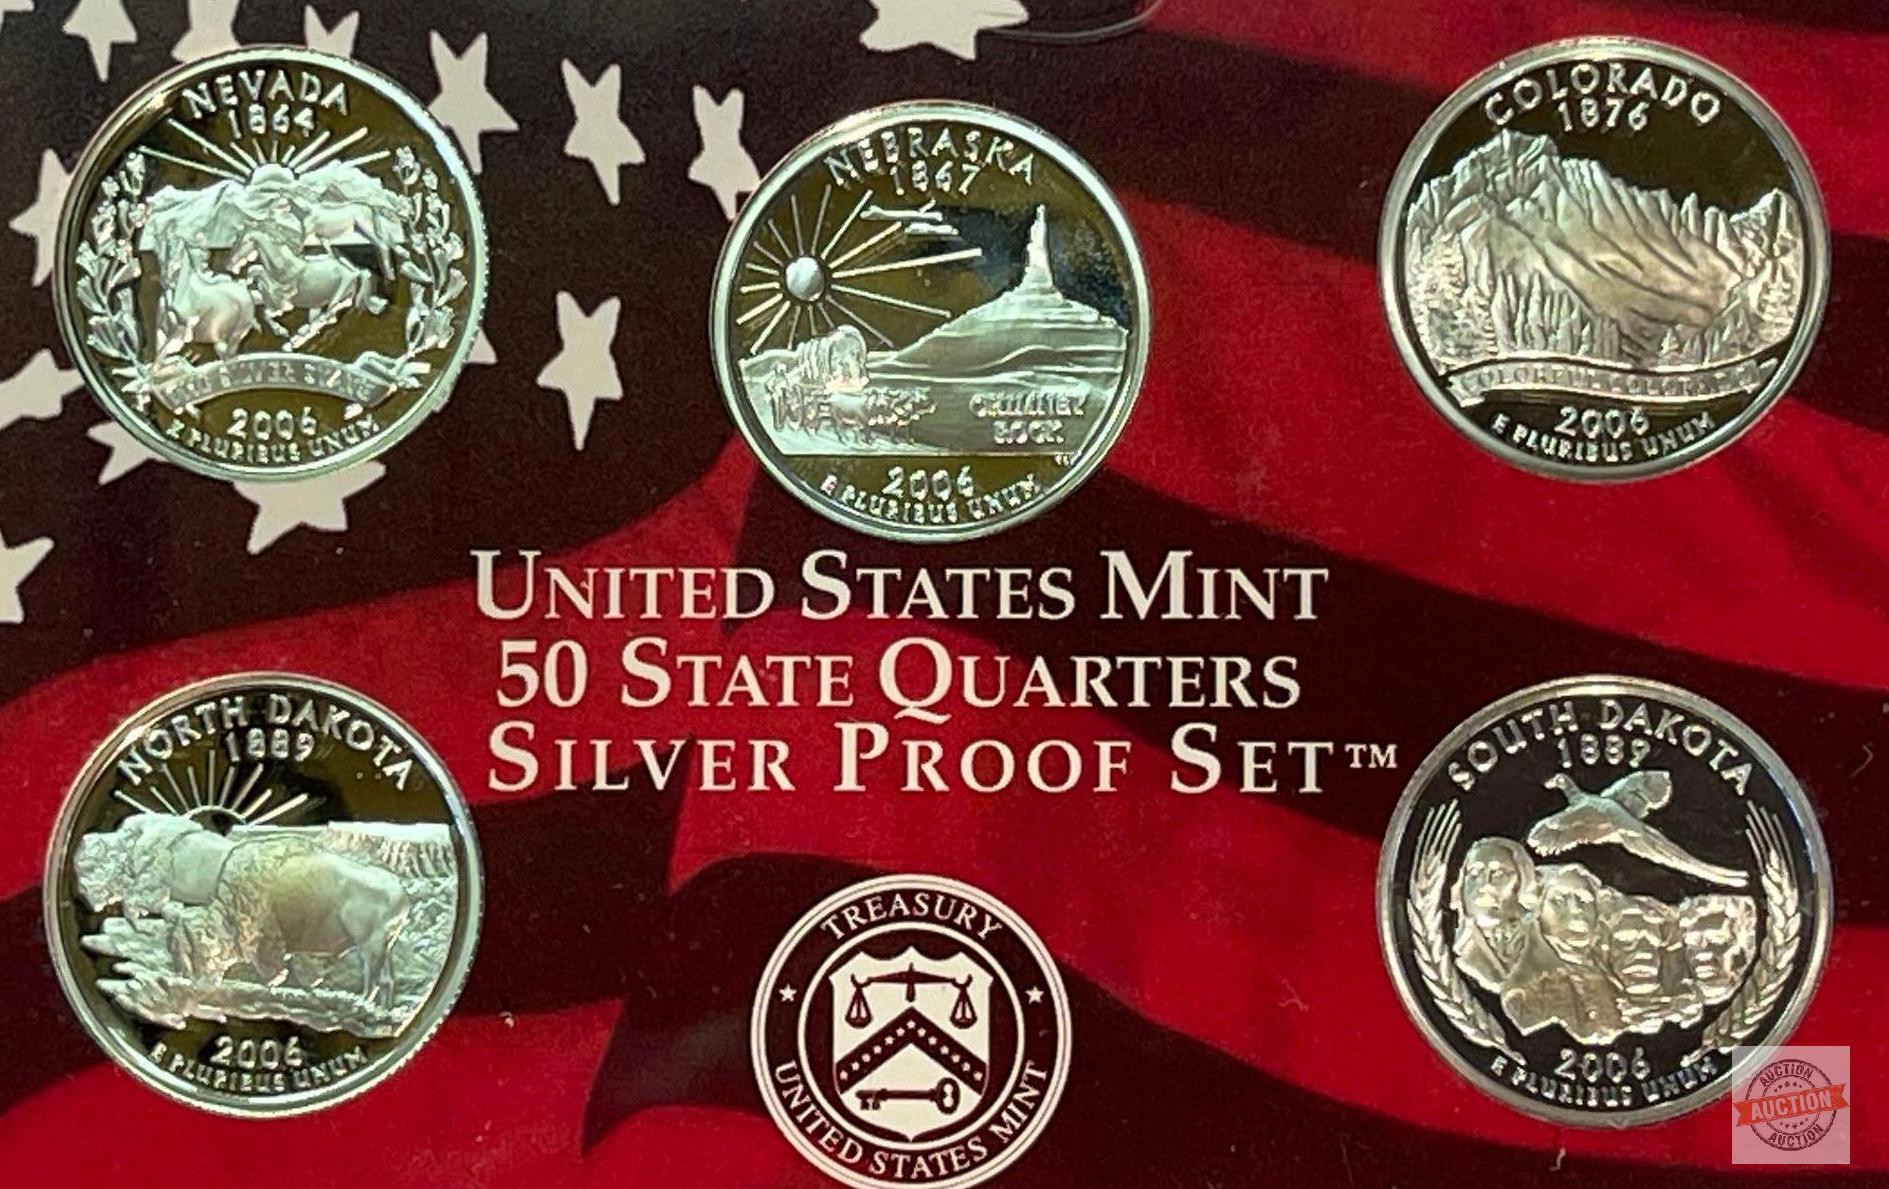 Silver - 2006s US Mint Silver Proof Set, 10 coins (7-90% silver)